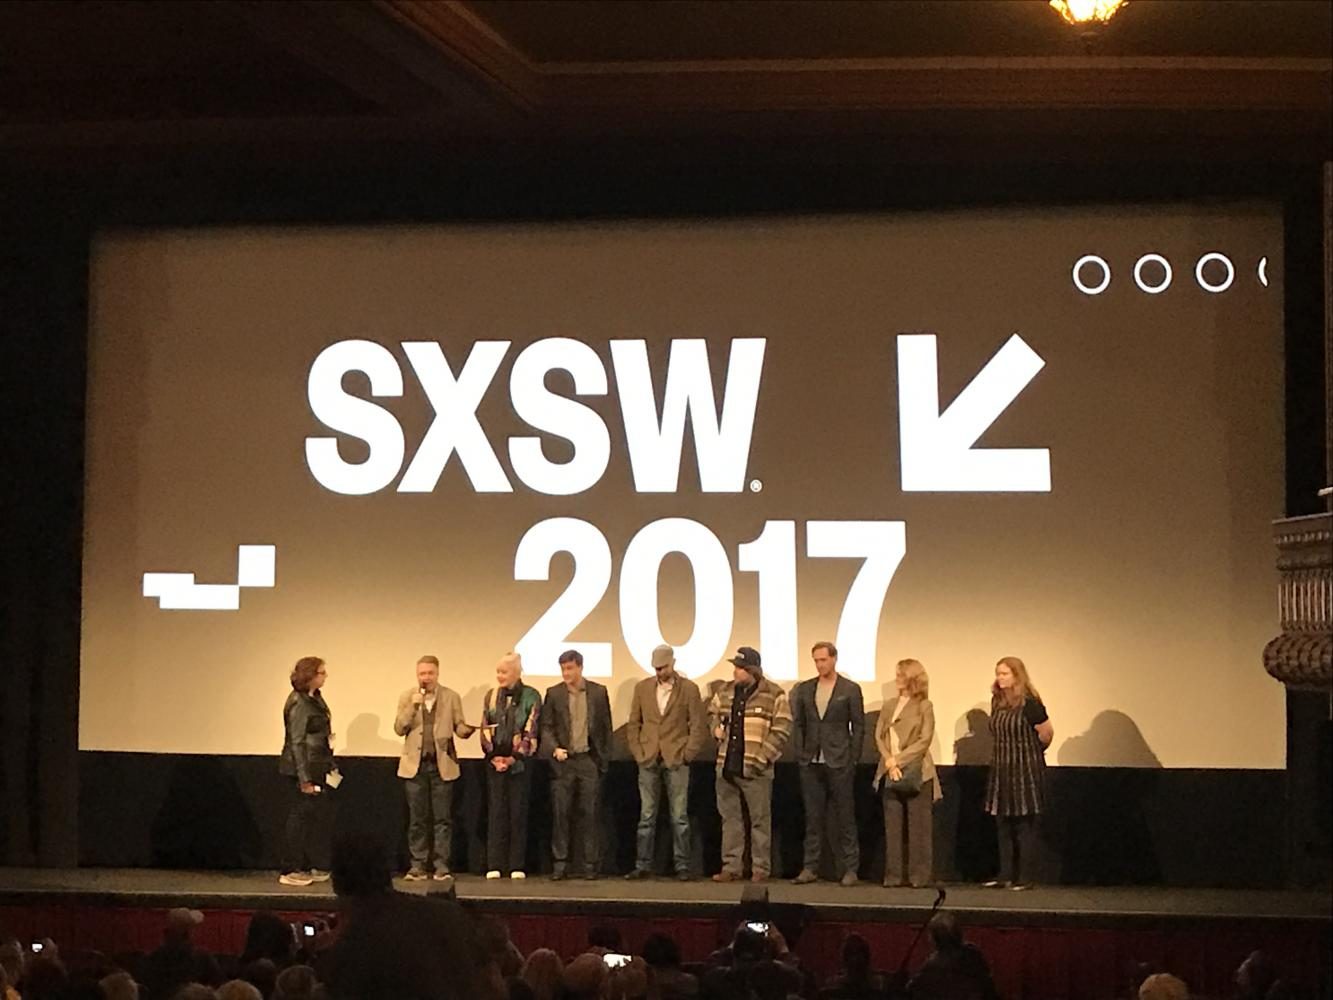 SXSW Quick Bites: 12 movies you should watch (or not) - The Egalitarian